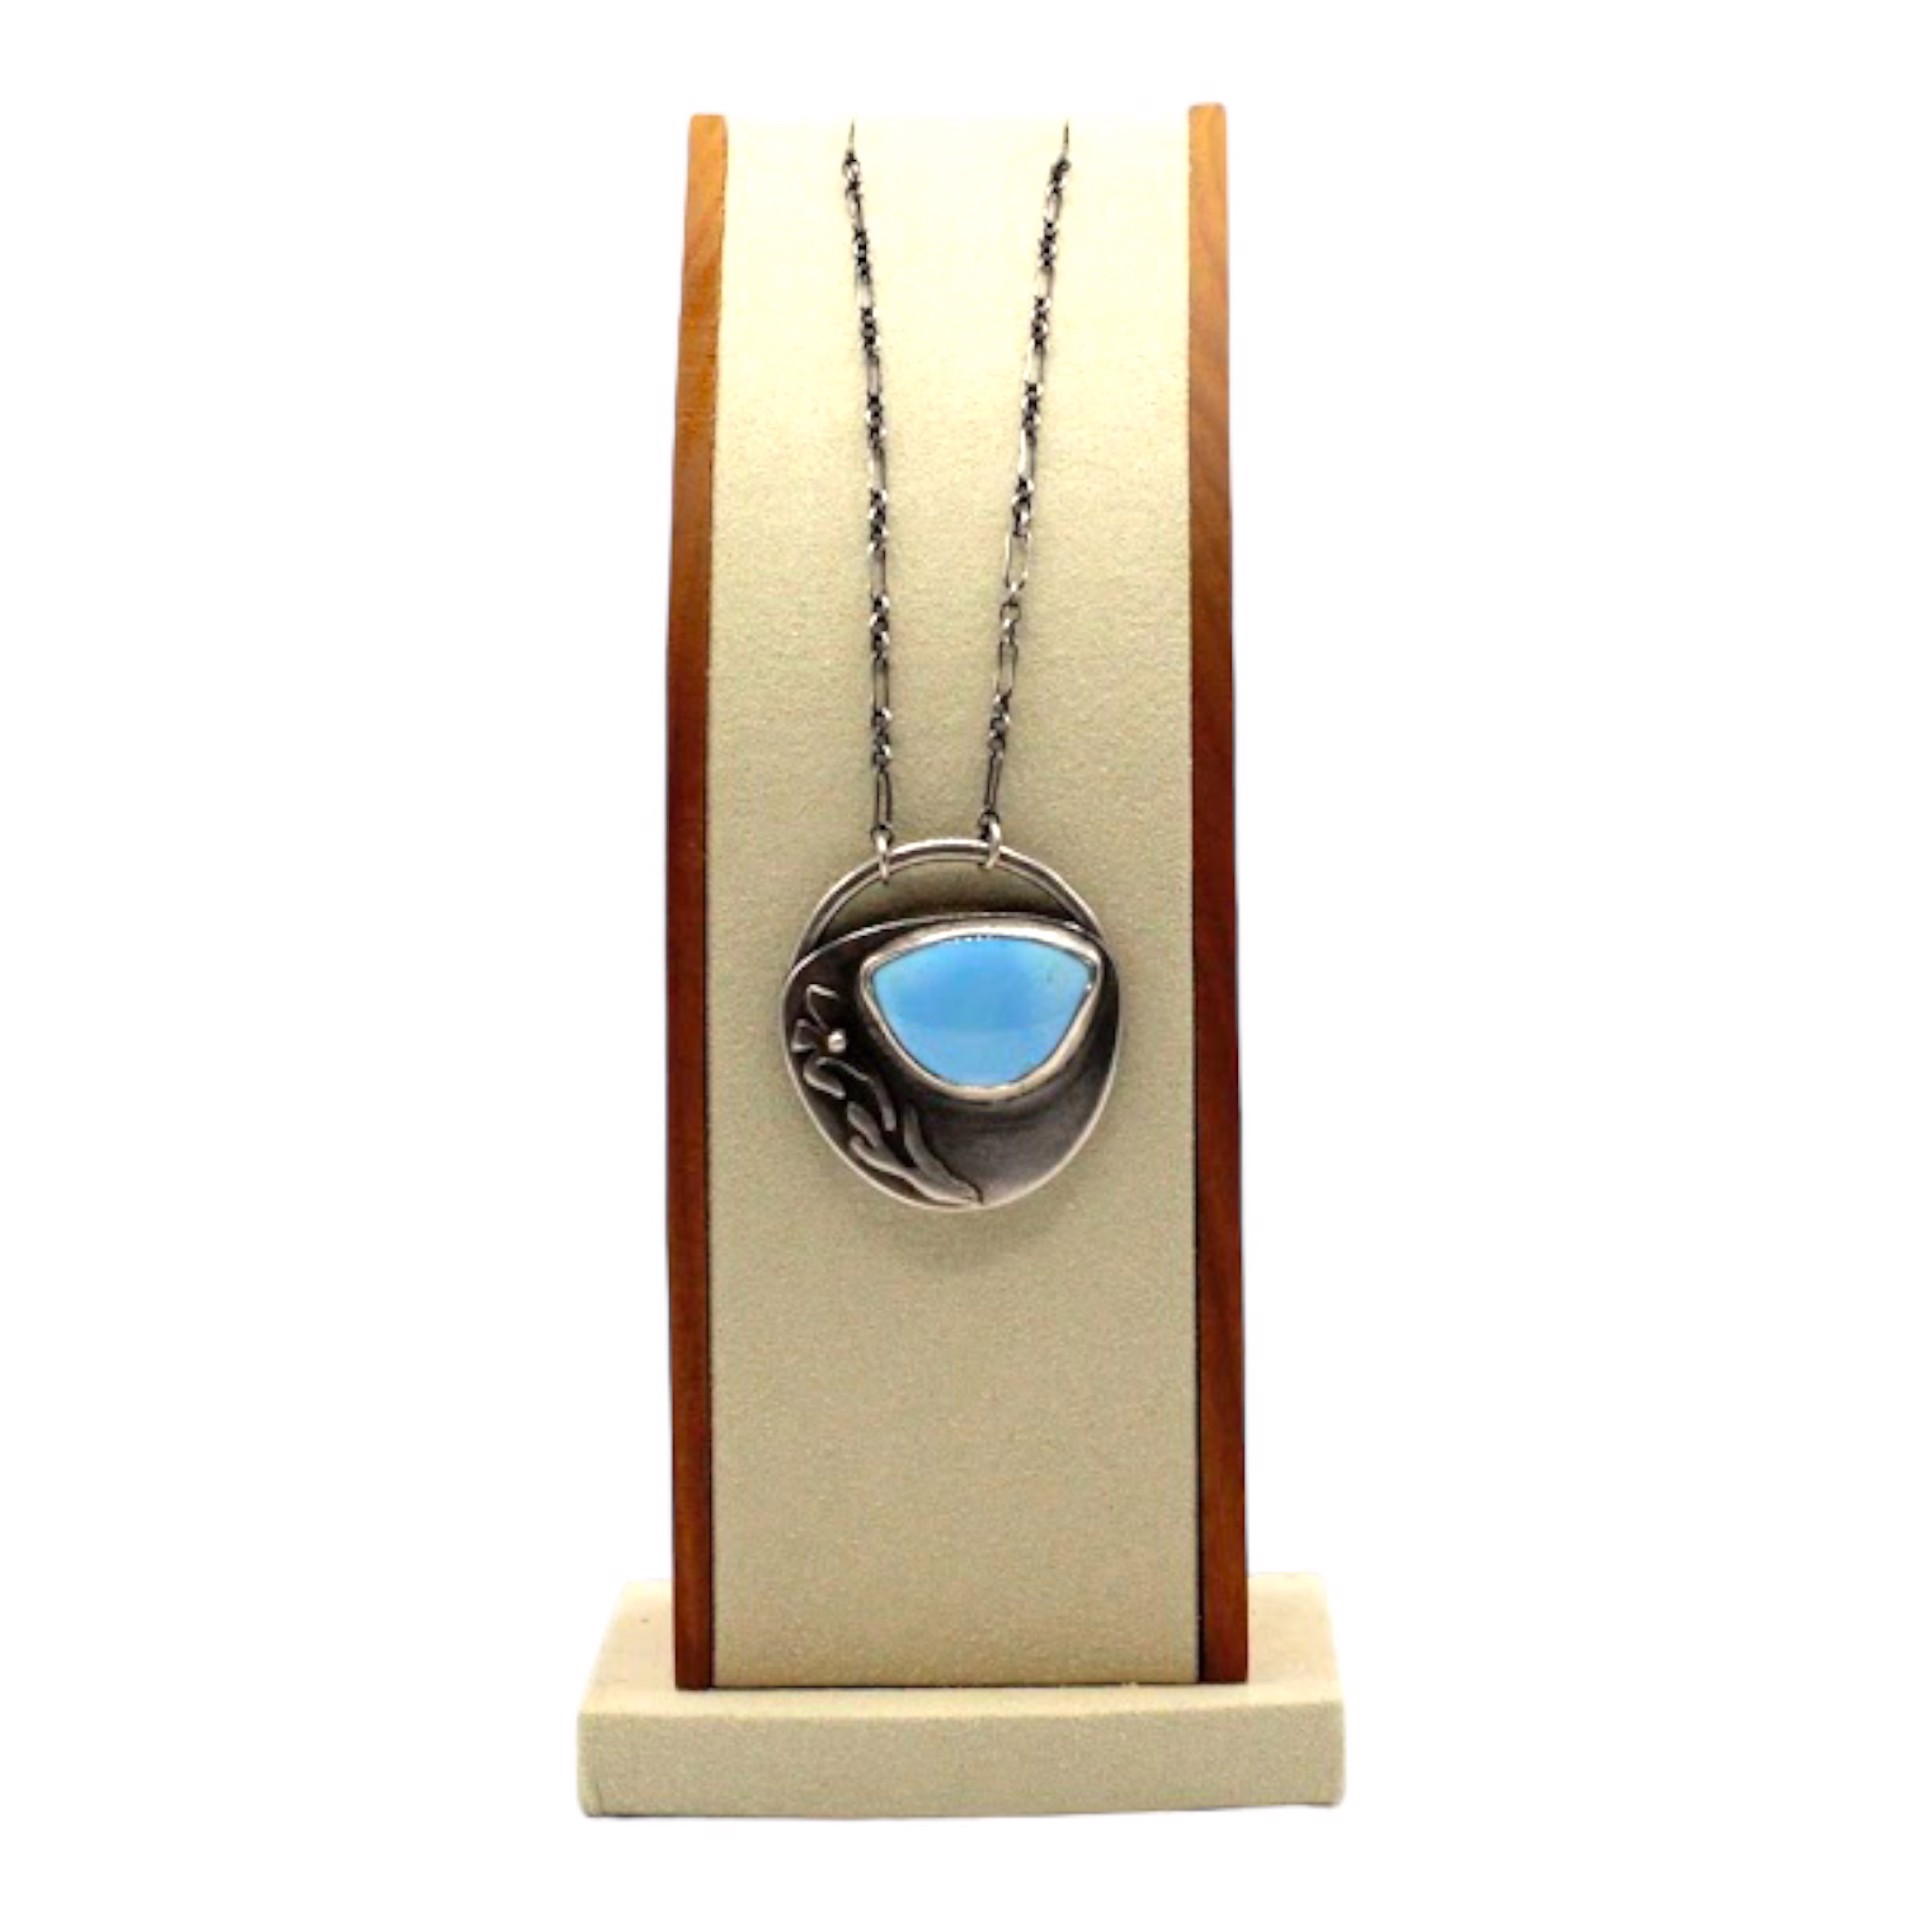 Golden Hills turquoise with hand-sawn Iris accents. Pendant w/ Sterling chain. by Ashley Hanna